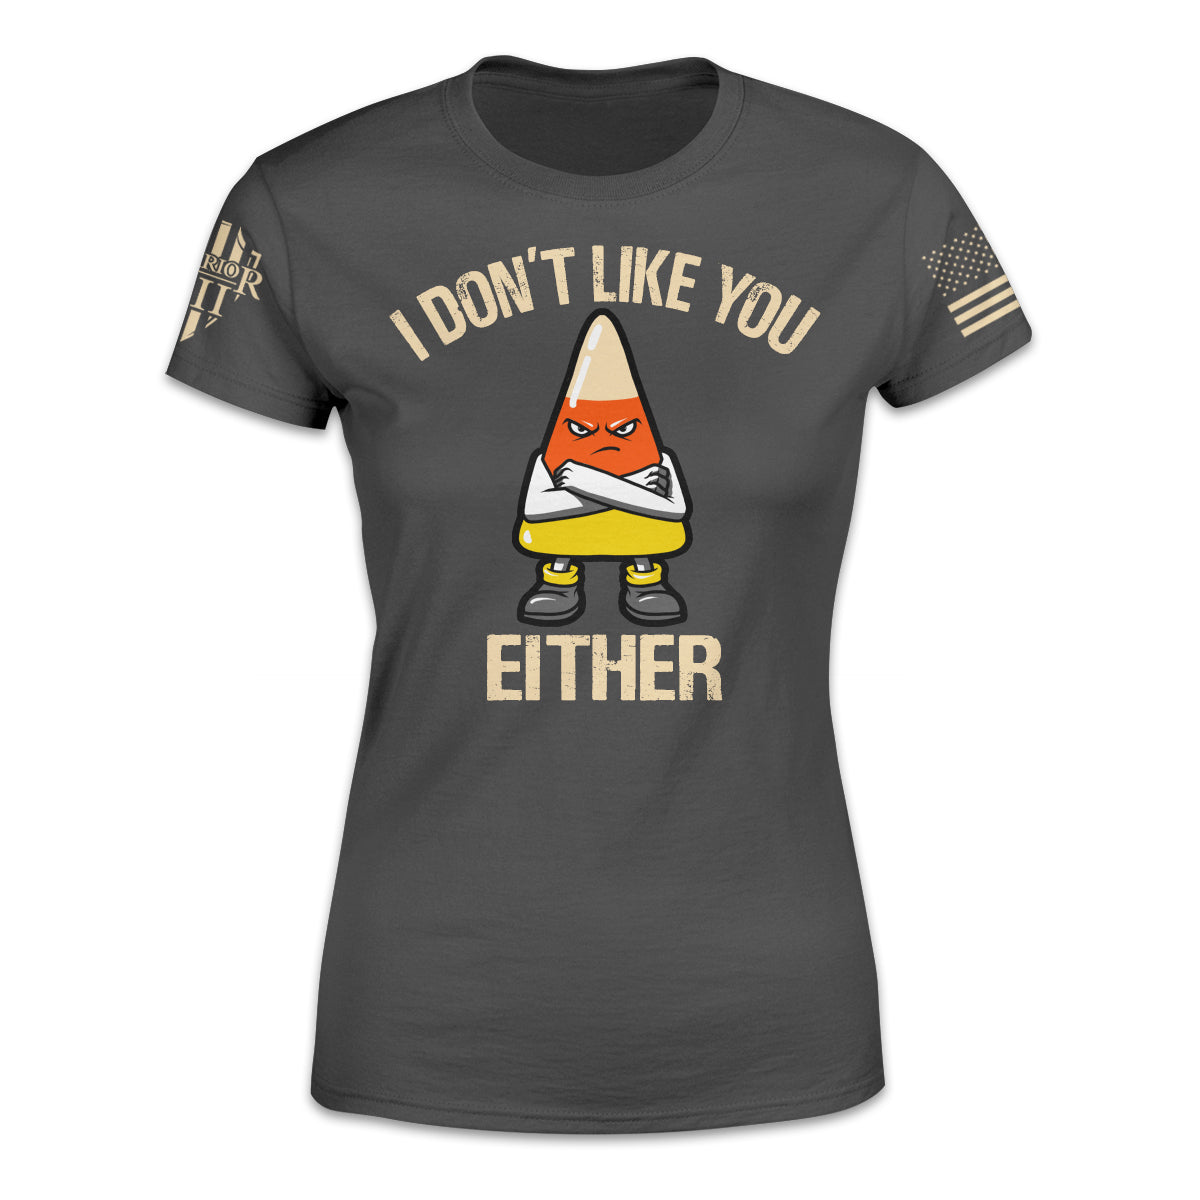 A grey women's relaxed fit shirt with the words" I don't like you either" and an angry cross armed candy corn printed on the front.